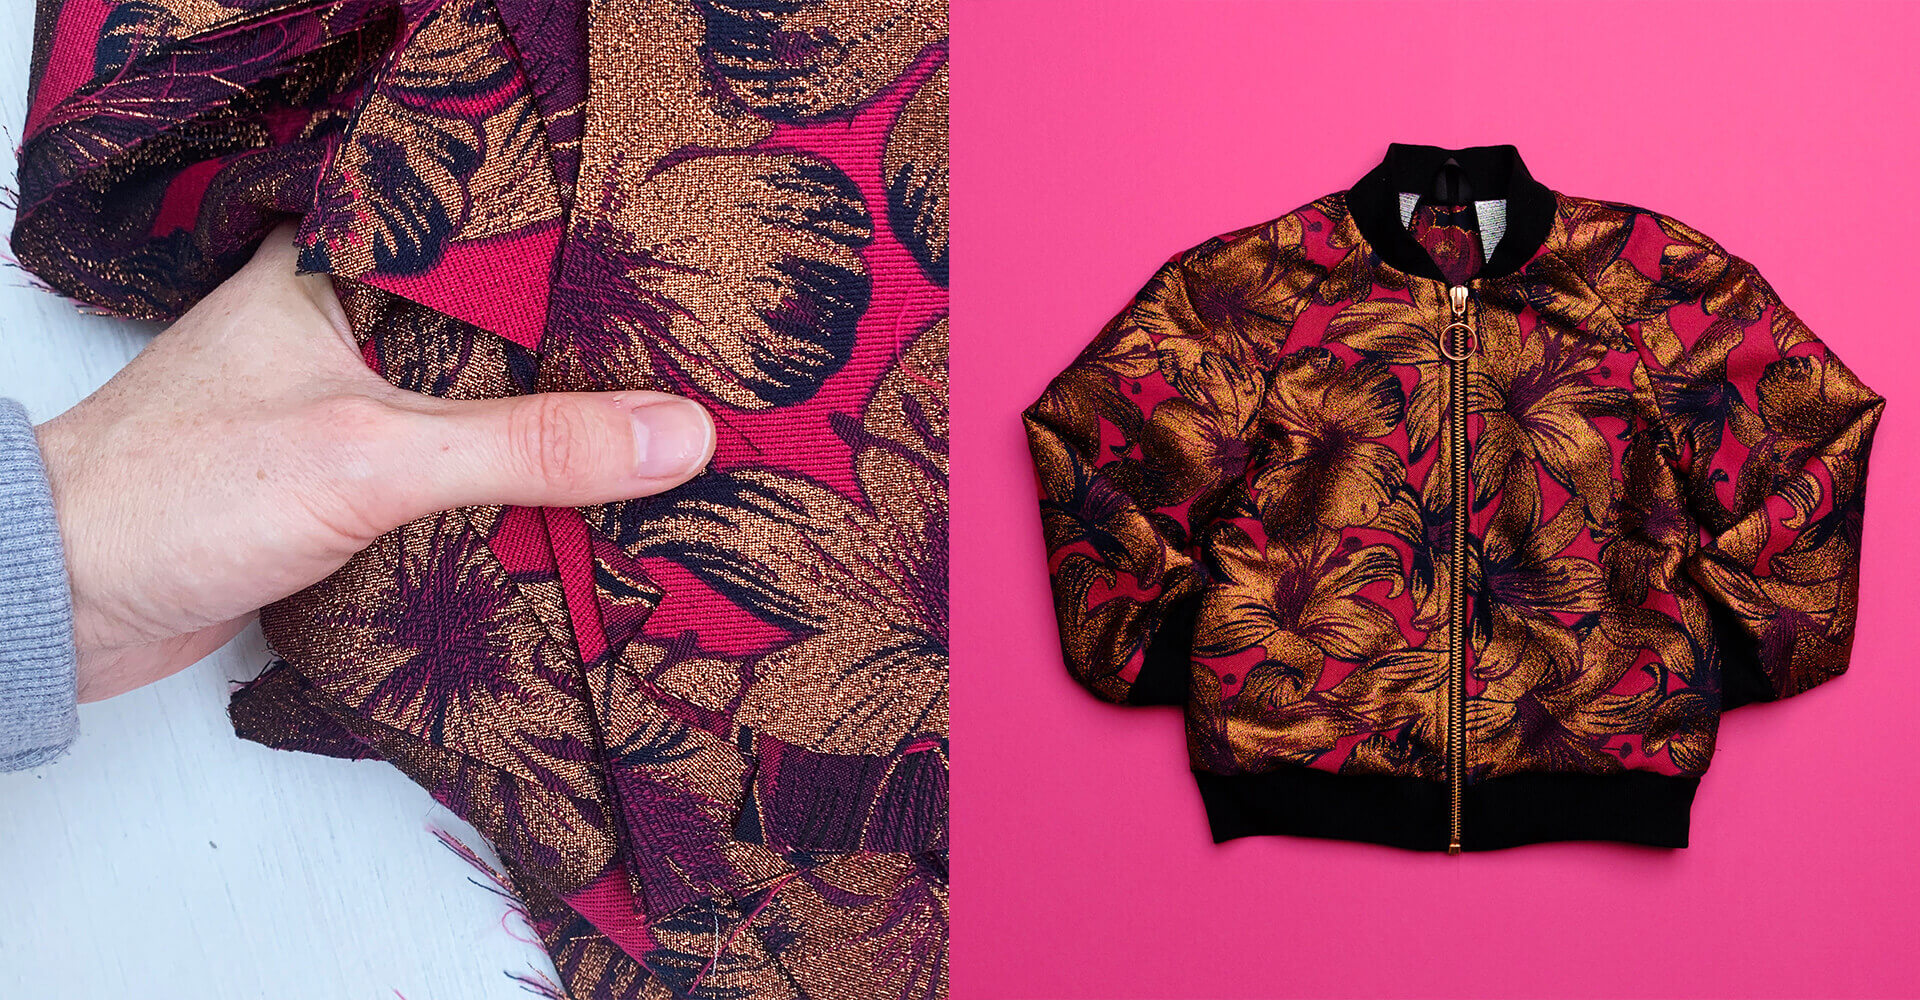 Two photos. On the left a close up of some deep pinky red and metallic copper floral brocade fabric held in a wonan's hand for scale. On the right a kids bomber jacket cut from the same floral fabric with a pink background.